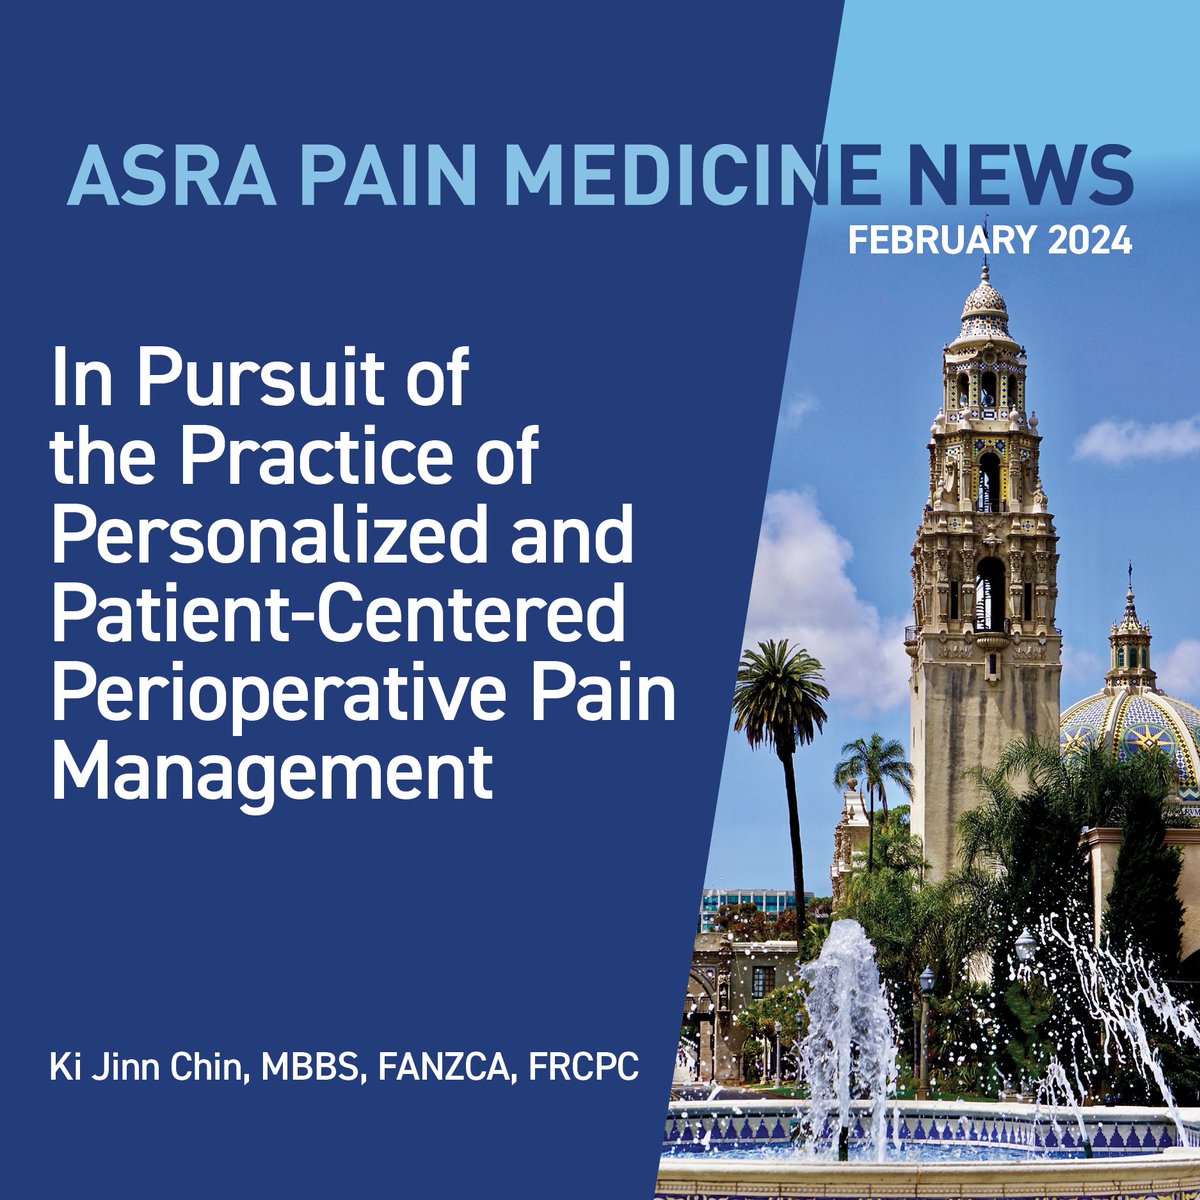 Interested in attending #ASRASPRING24? Take a deep dive into the meeting theme, 'Precise, Practical, Personalized, and Patient-Centered' with Dr. @KiJinnChin's article in #ASRANews 🔗 ow.ly/xwCg50QKei2 Or, listen to the article here! ow.ly/xen150QKehx